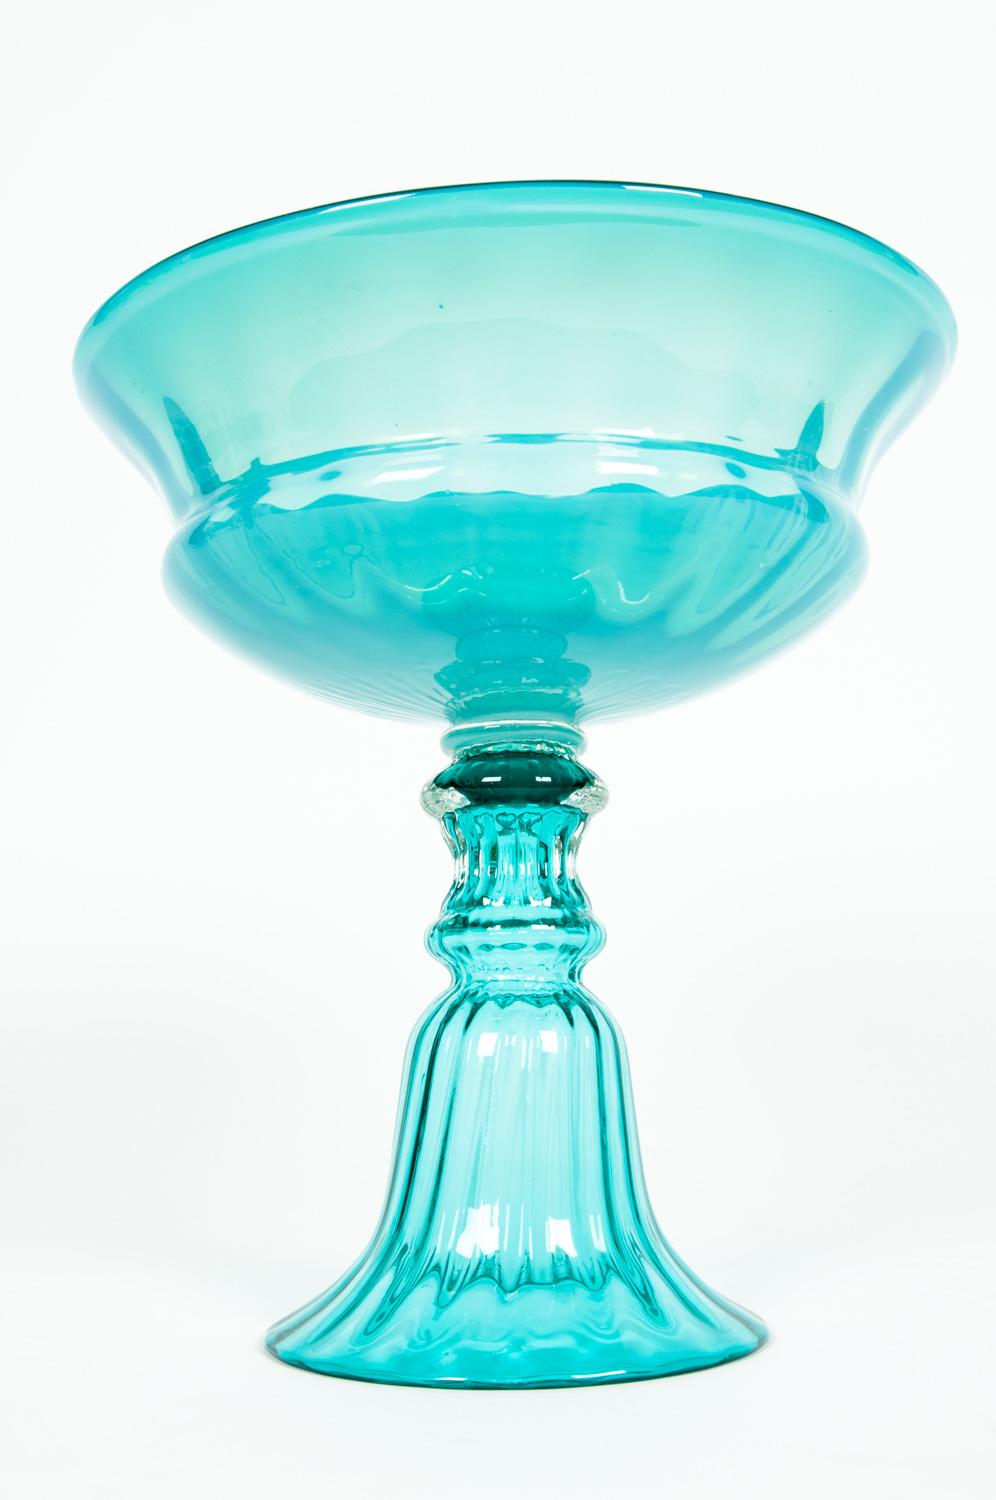 Mid-Century Modern turquoise color Venetian glass decorative centerpiece. The piece is in excellent condition. The centerpiece measure about 12.5 inches high X 12 inches diameter.